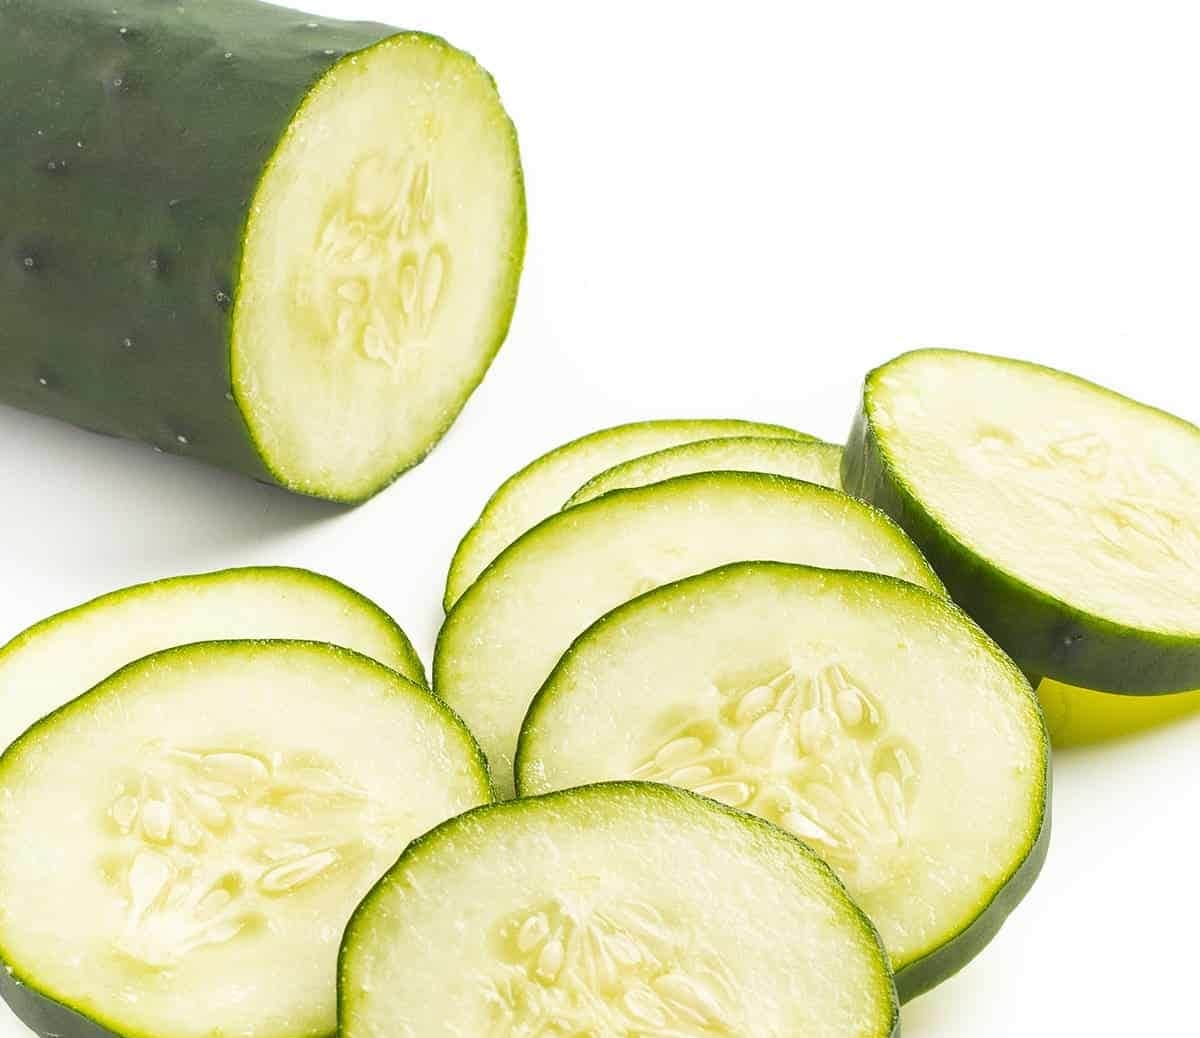 Cucumber cut into slices on white background.